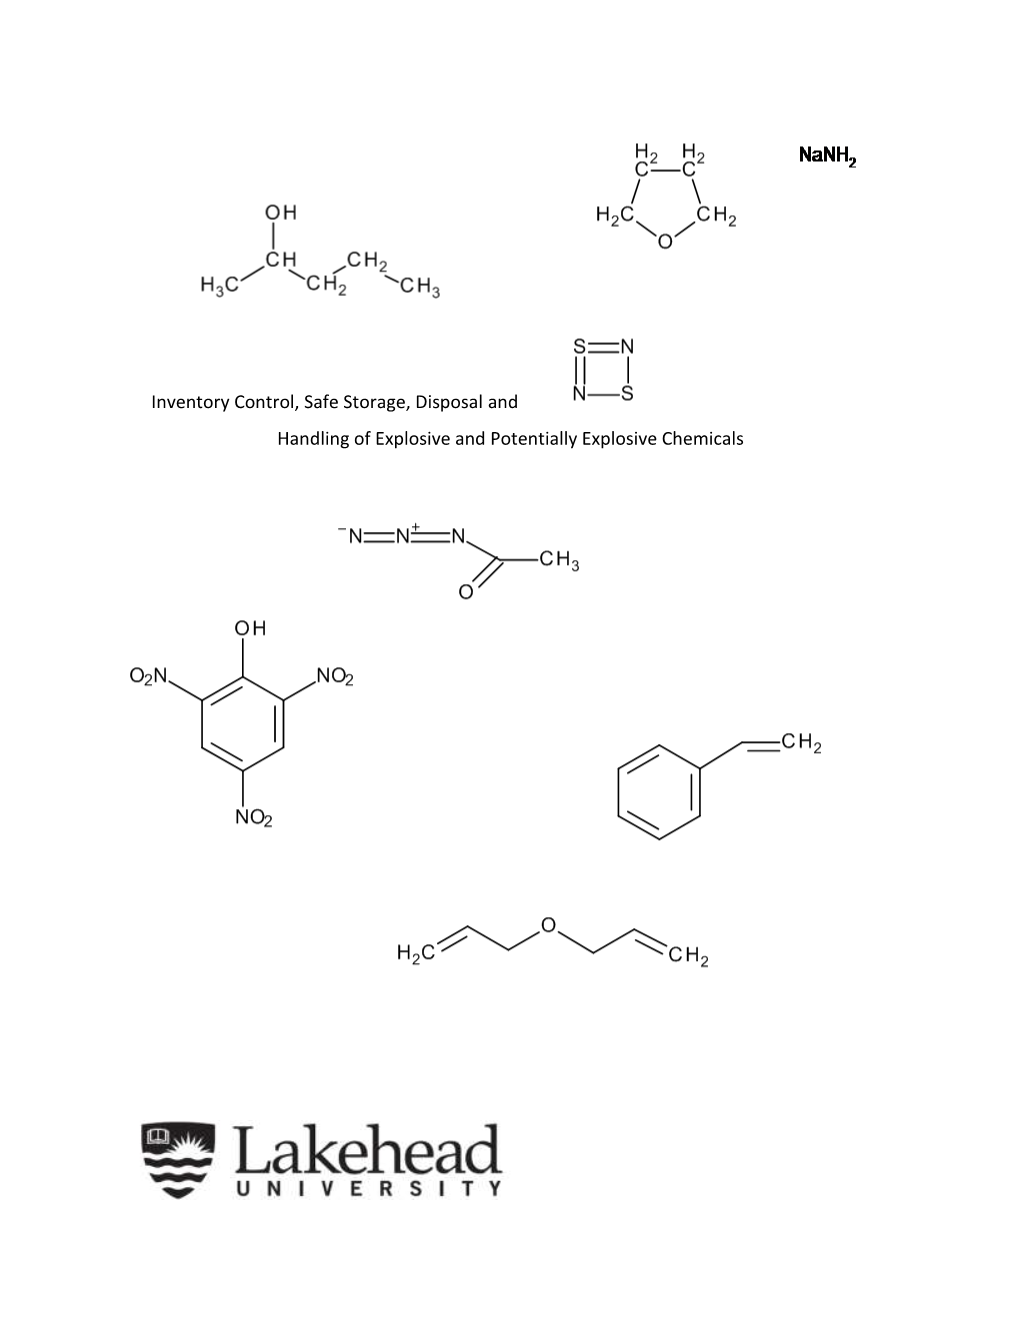 Peroxide Forming Compounds Safety Procedure